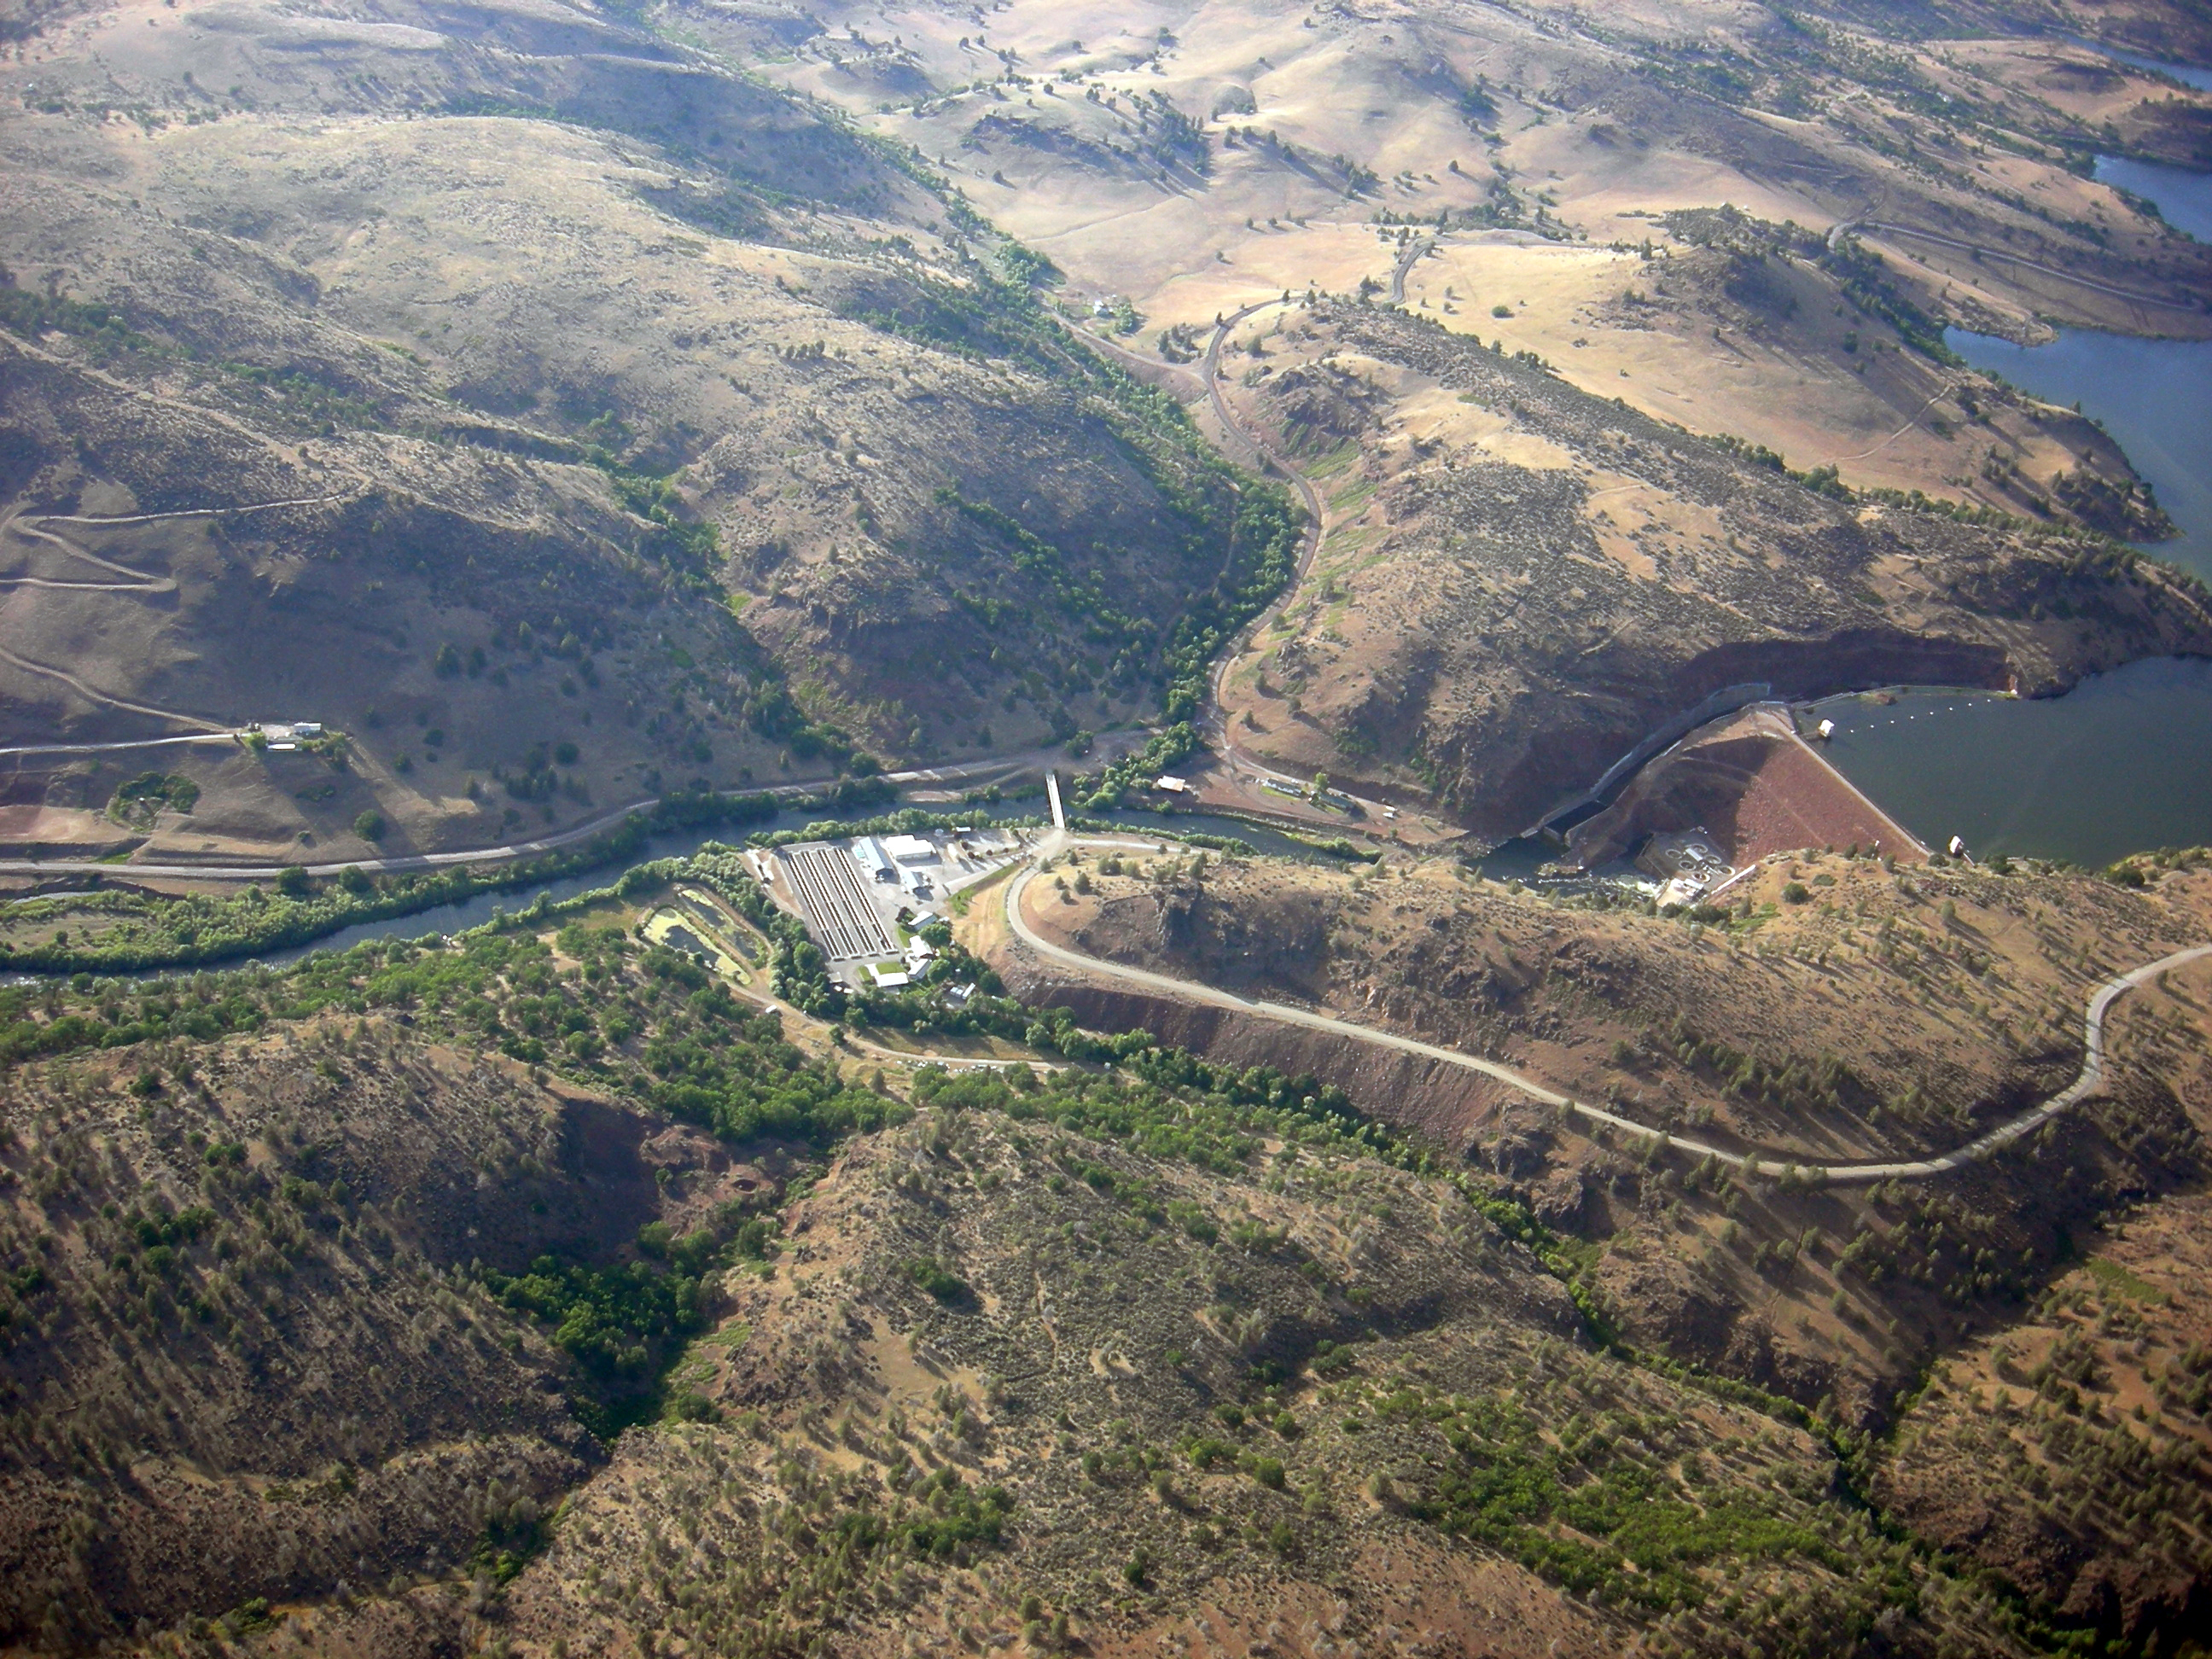 Aerial view of the Iron Gate Dam and Hatchery along the Klamath River